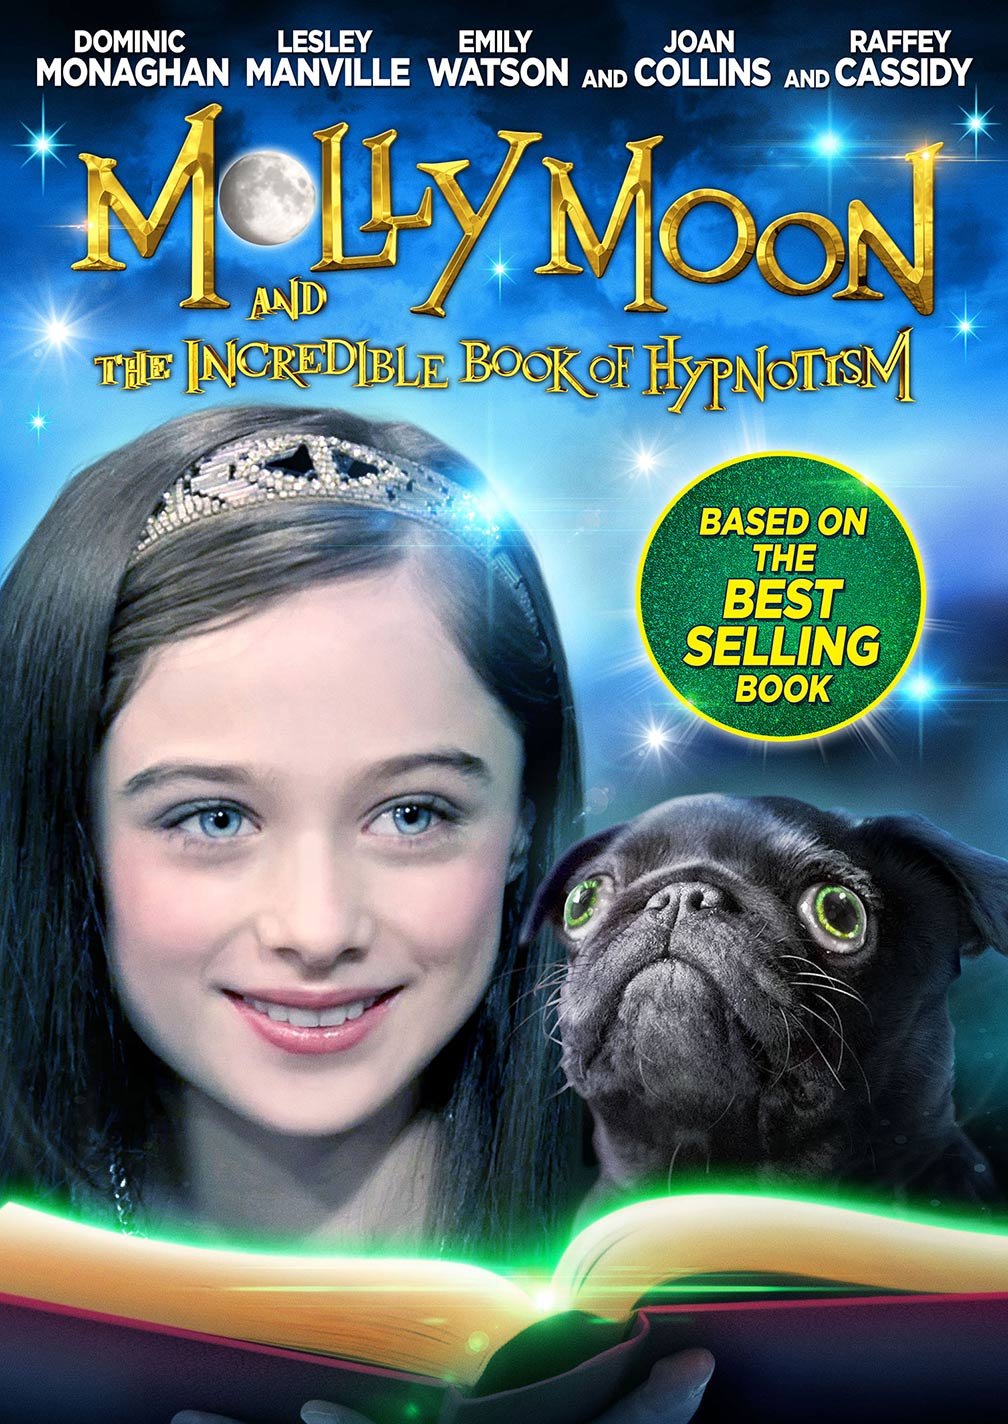 Poster of the movie Molly Moon: Incredible Book of Hypnotism